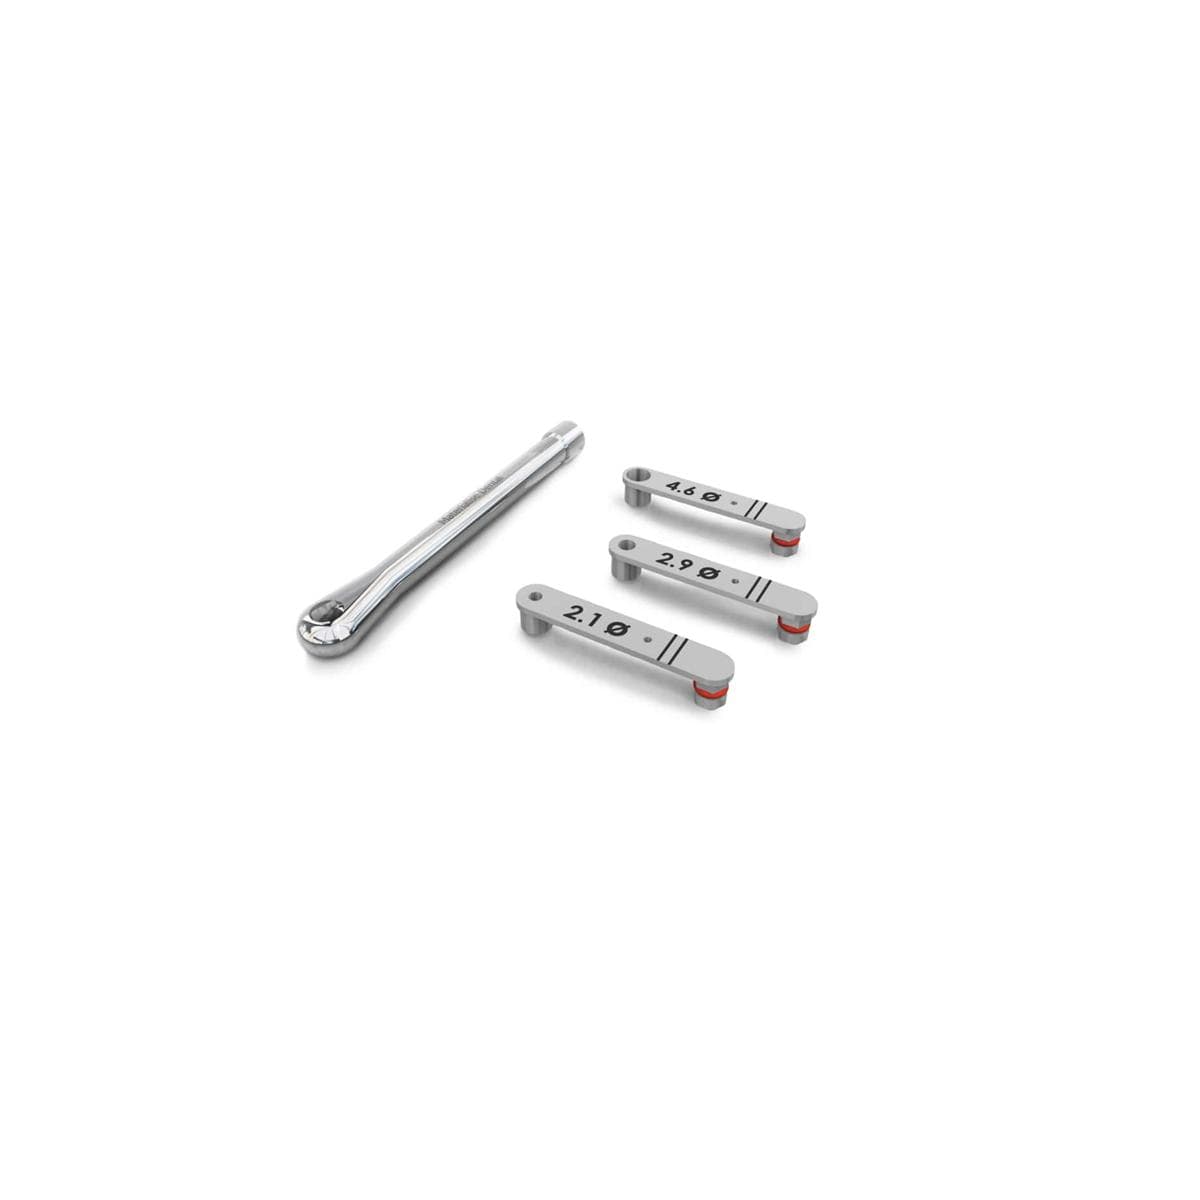 Cl de forage DENTSPLY SIRONA - Diamtre 3.8mm - Taille M